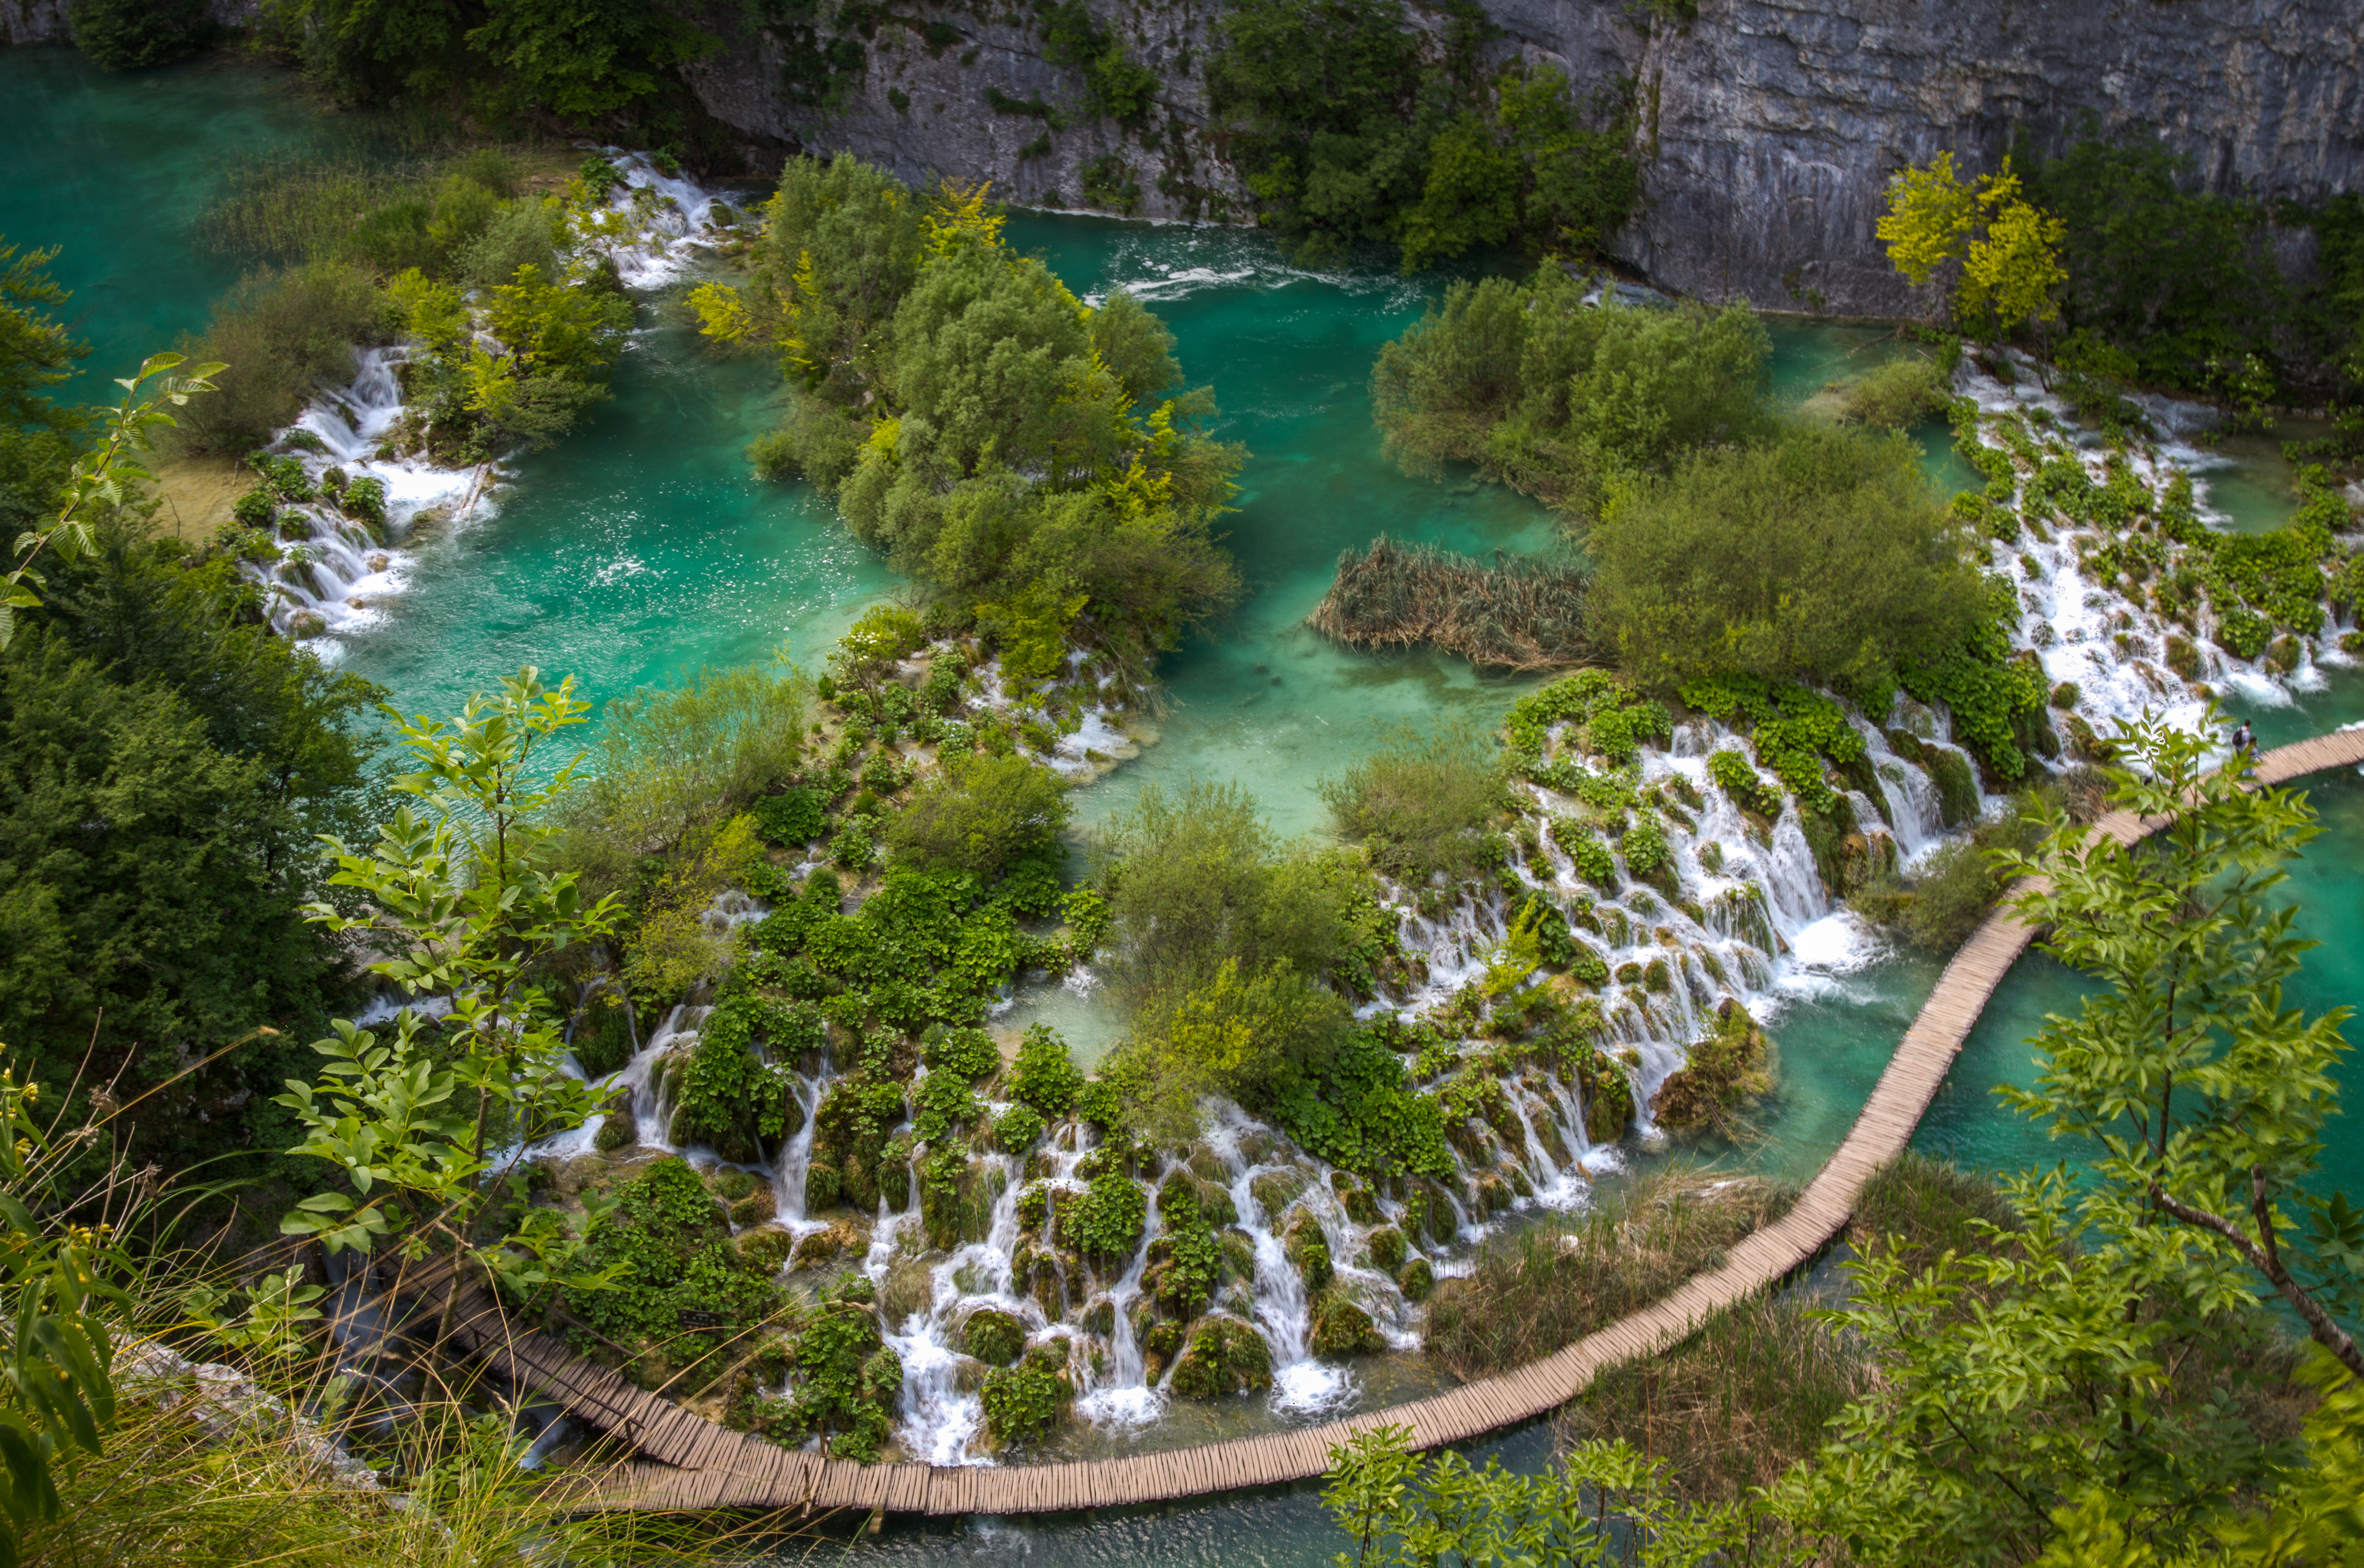 How to travel to Plitvice Lakes National Park from Zagreb Croatia